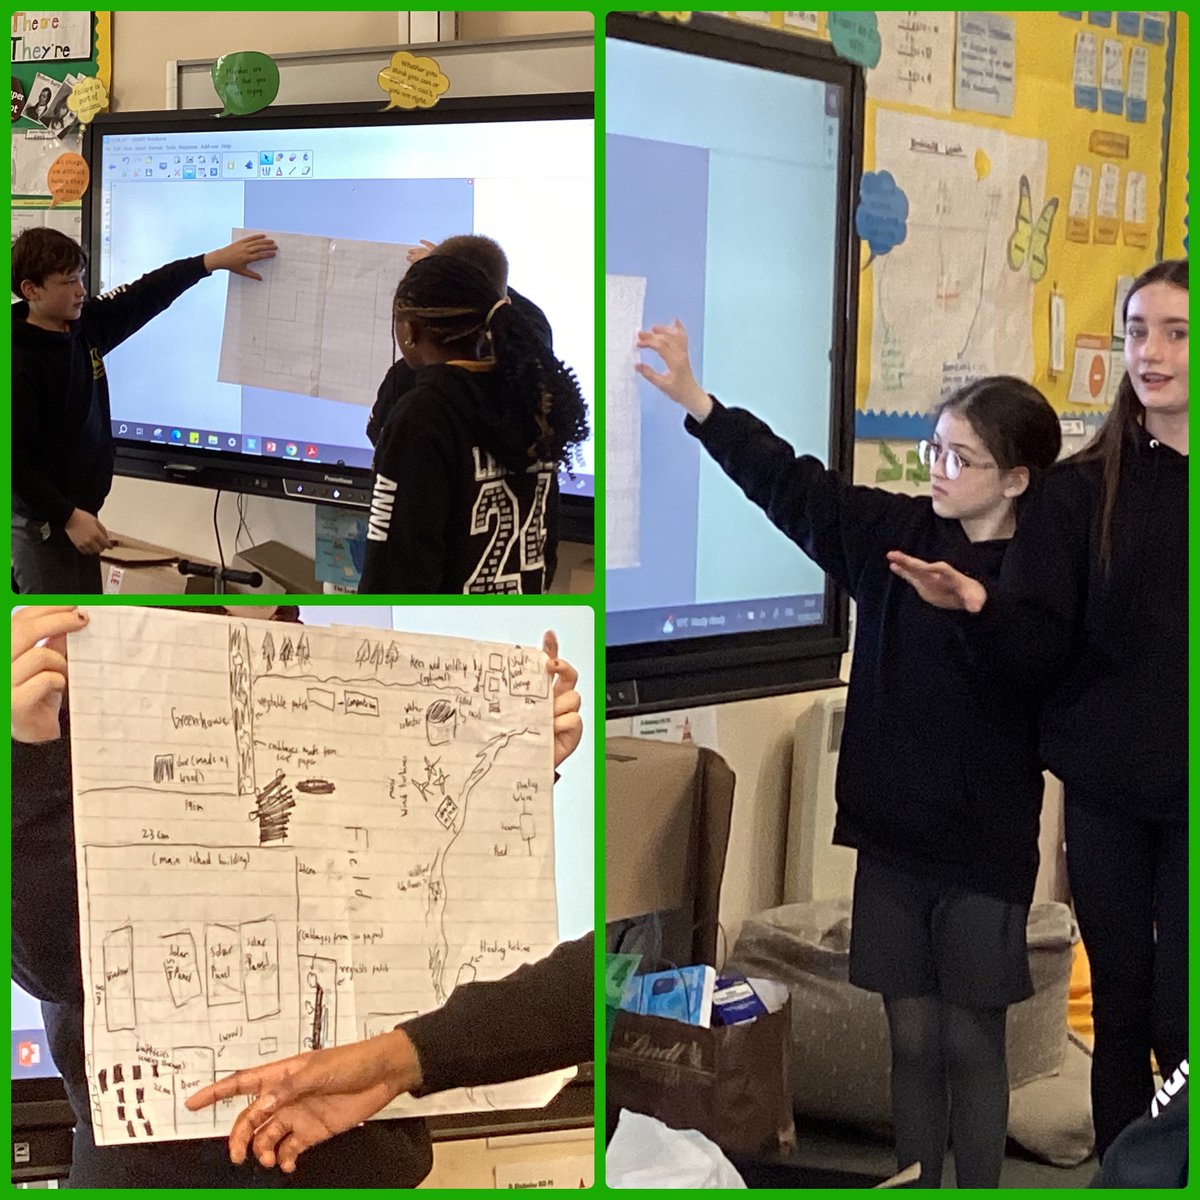 P7 spent the afternoon planning their Climate Smarter model sustainable schools. We will start building them shortly and can't wait for our in-school competition! #STEMstnics #metaskillsstnics #believingandachievingstnics